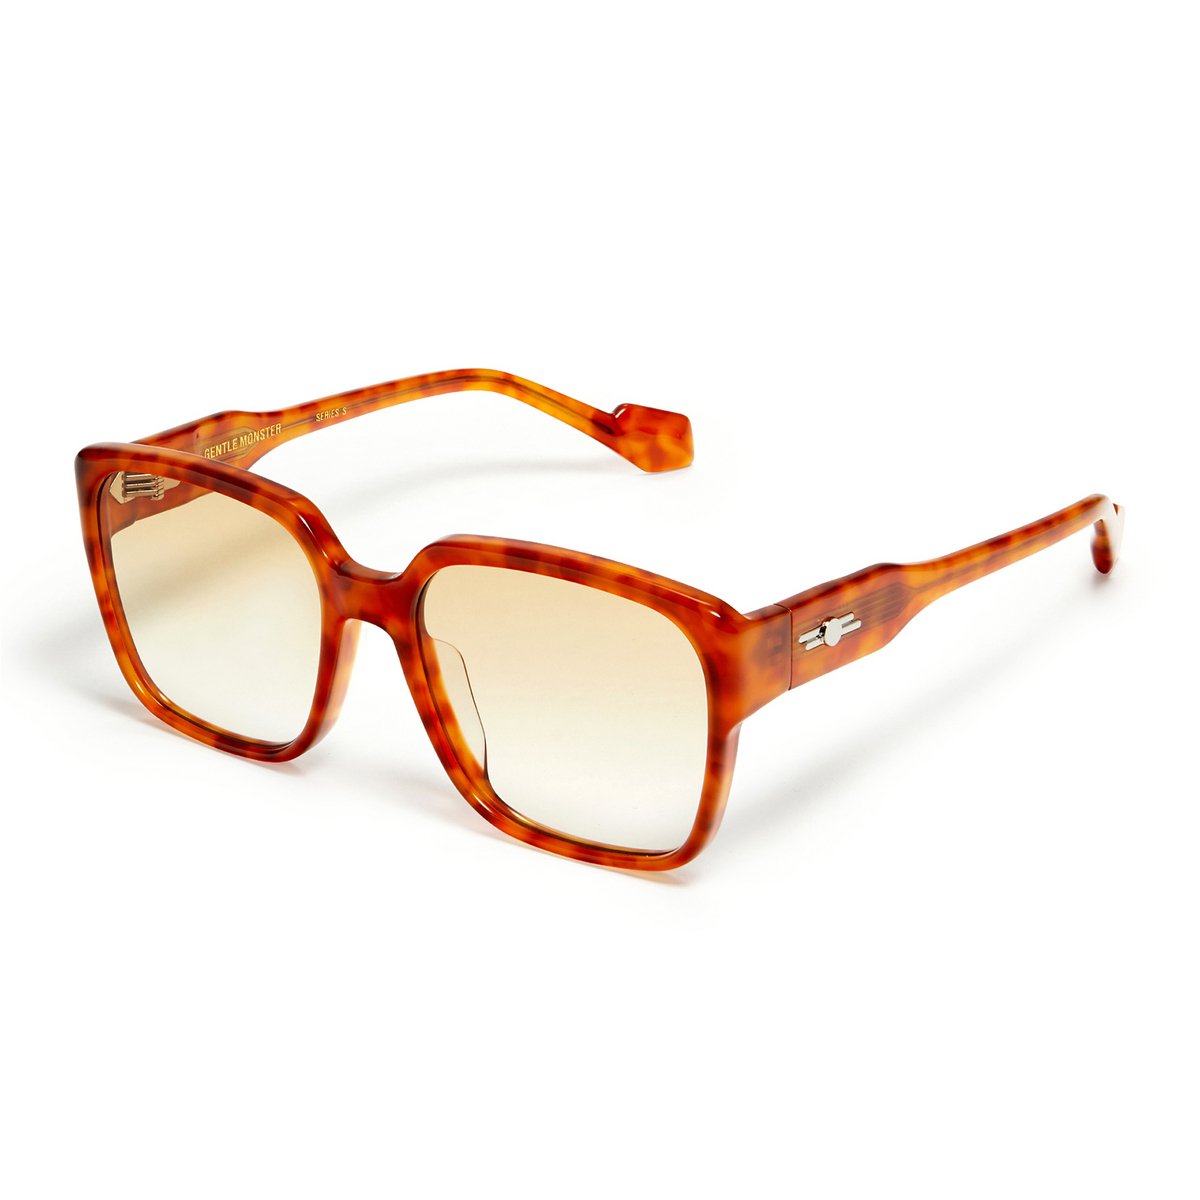 Gentle Monster® Square Eyeglasses: Loopy color Brown Tortoise L1 - three-quarters view.